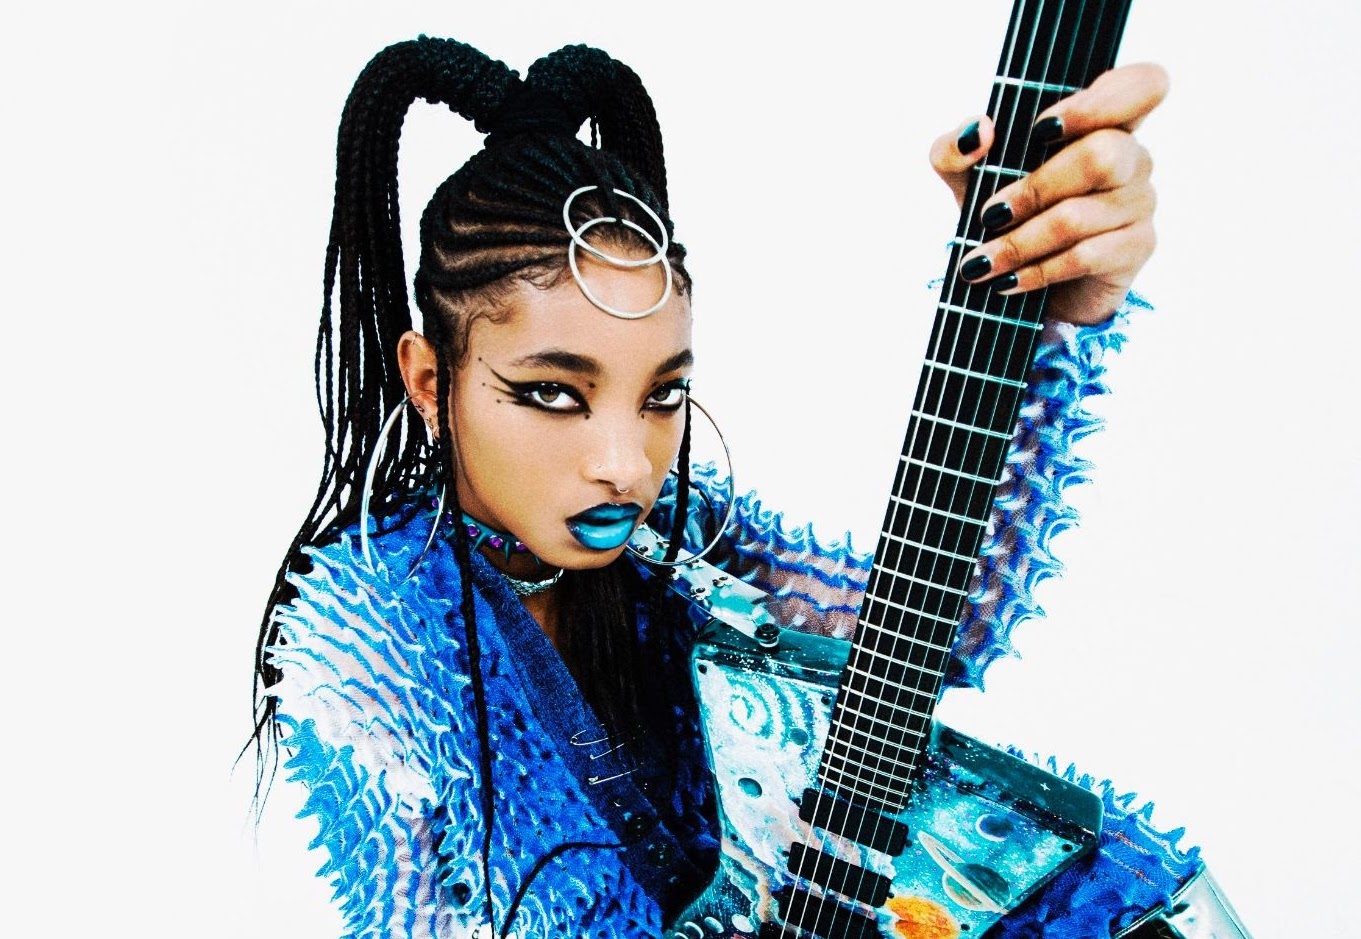 Willow Smith Fills Upcoming Fifth Album with “Transparent Soul”